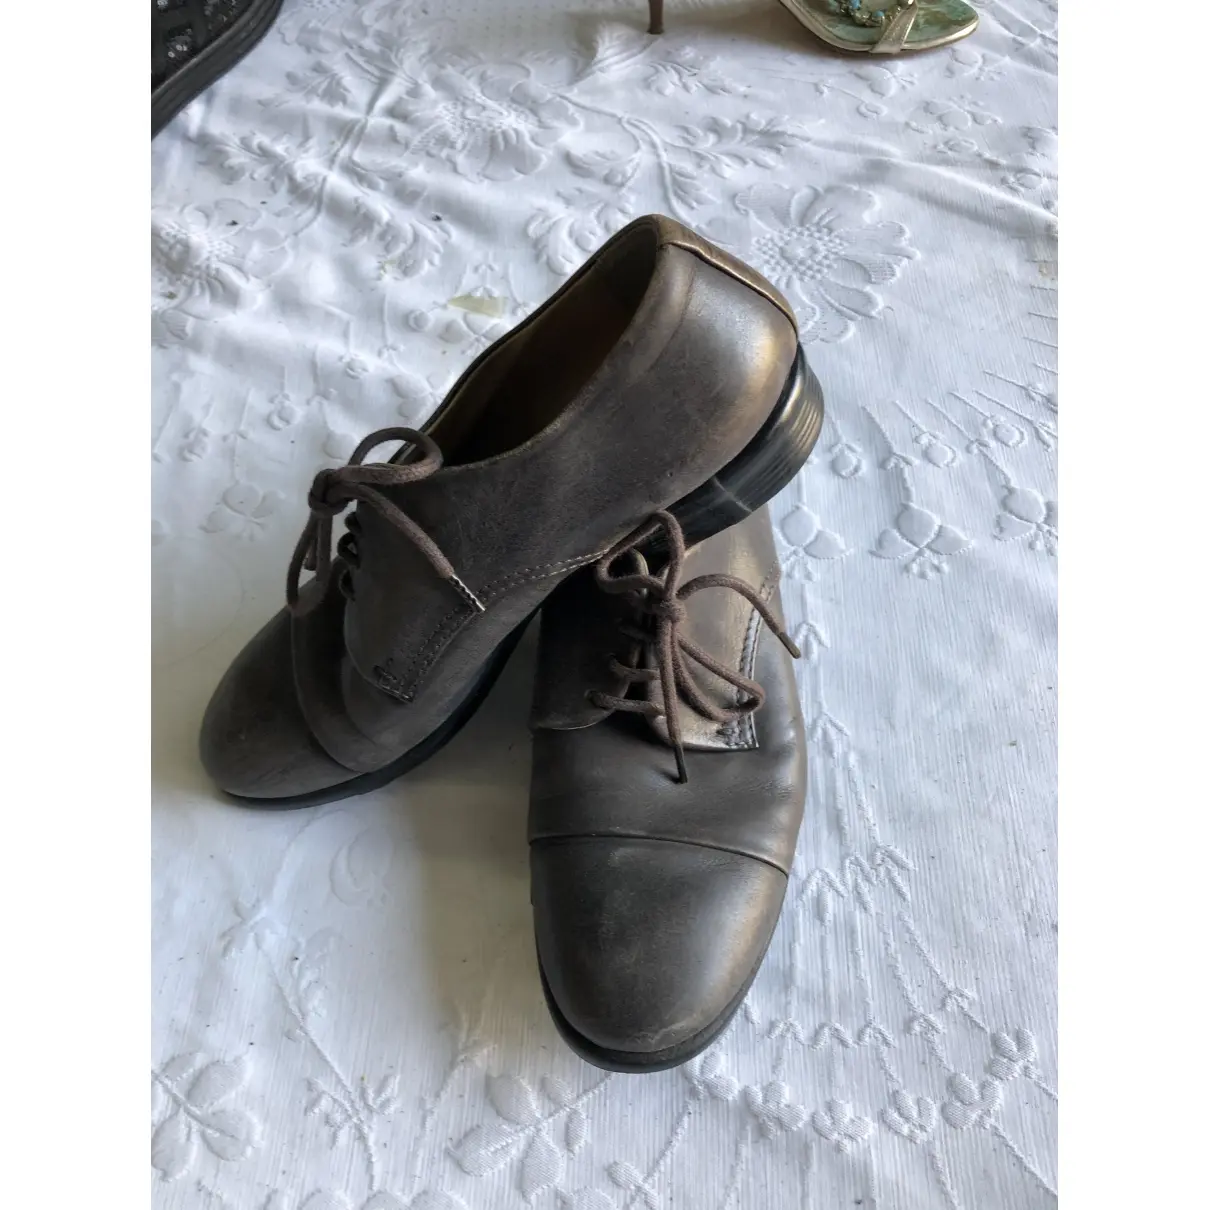 Bikkembergs Leather flats for sale